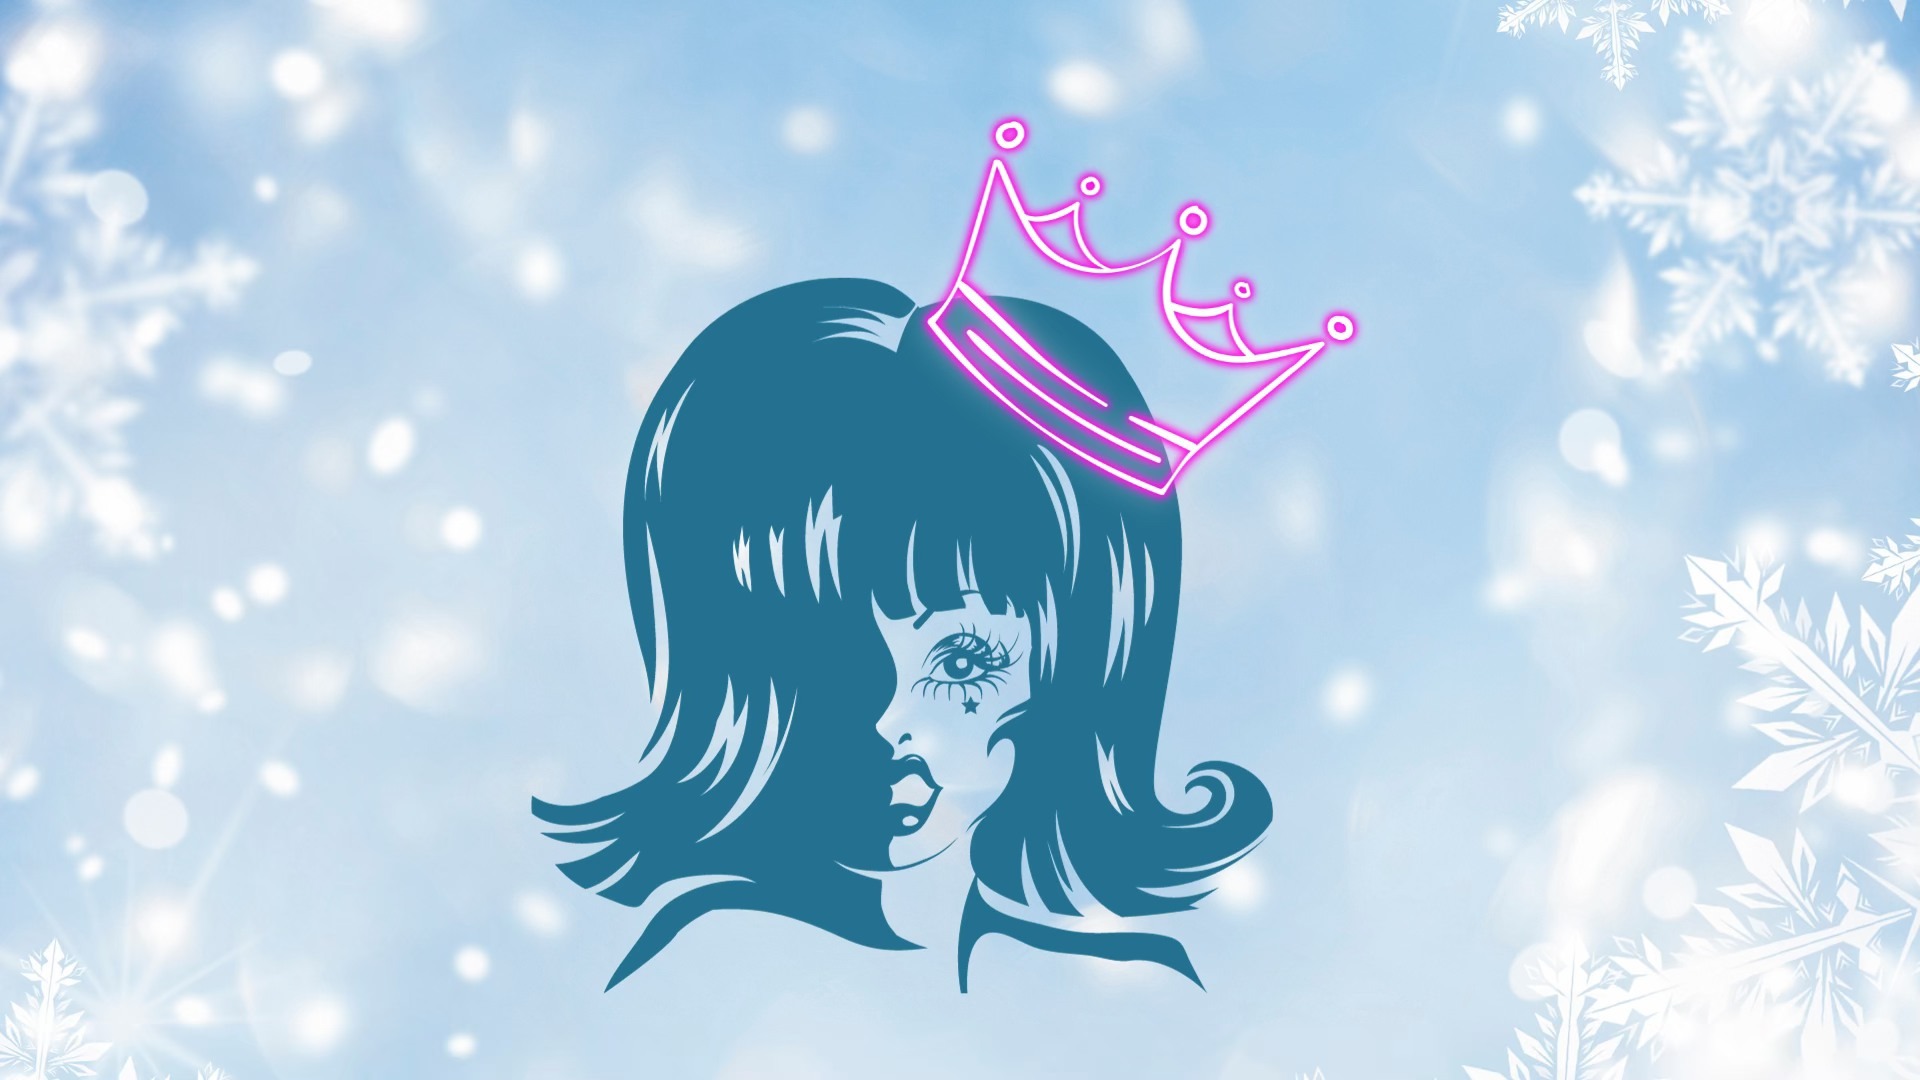 Queens on Ice: Adult Prom & Drag Show